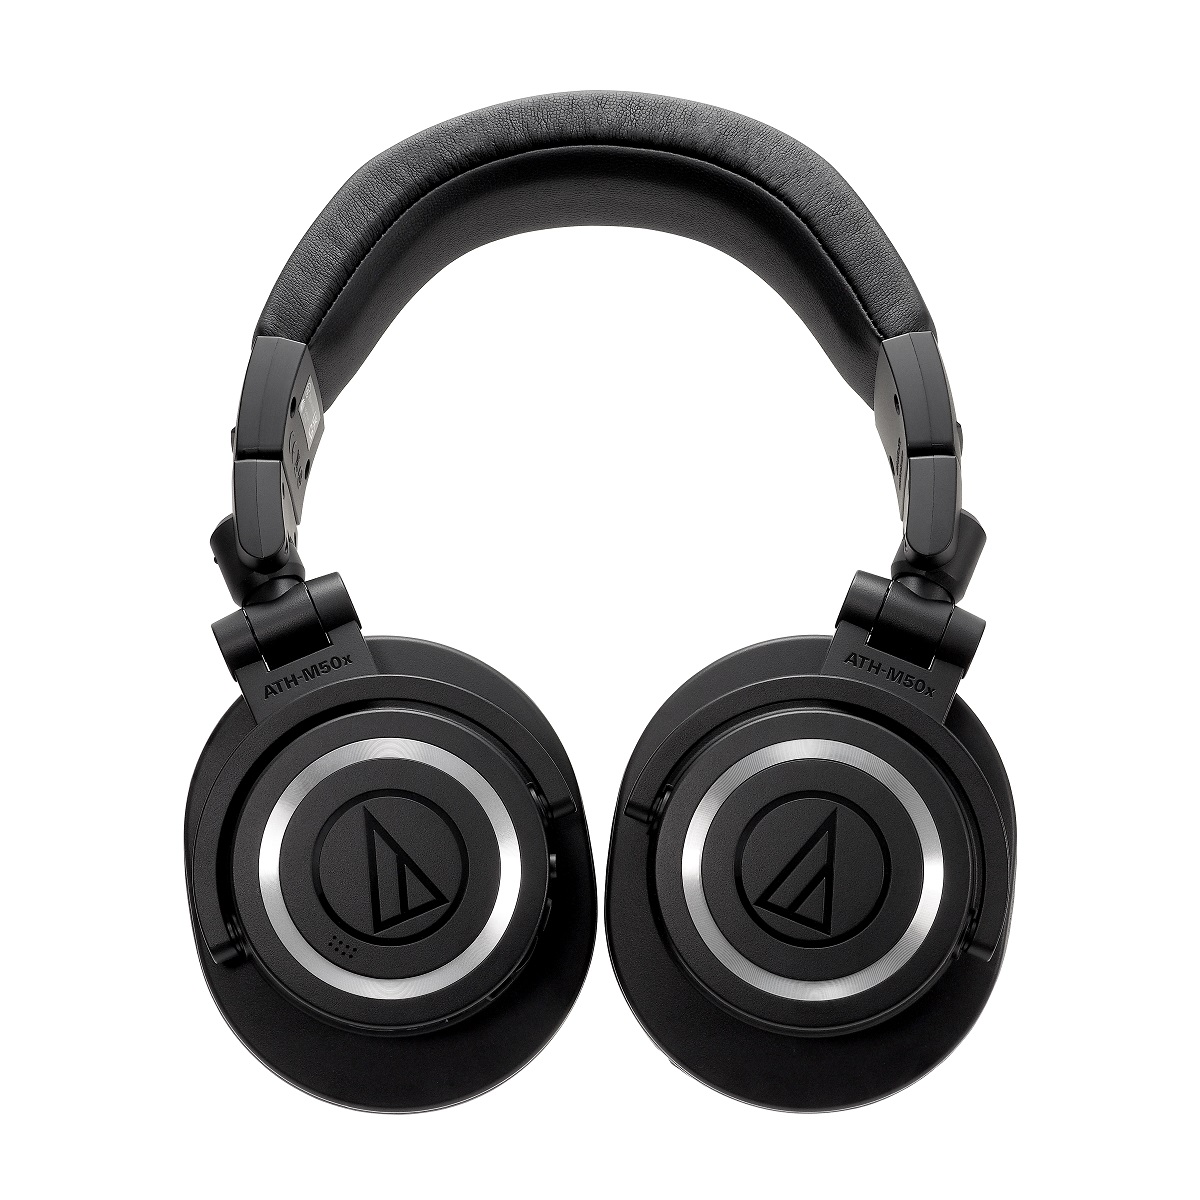 AudioTechnica ATH-M50xBT2 Wireless Over-Ear Headphones with Bluetooth (Black) - image 5 of 8